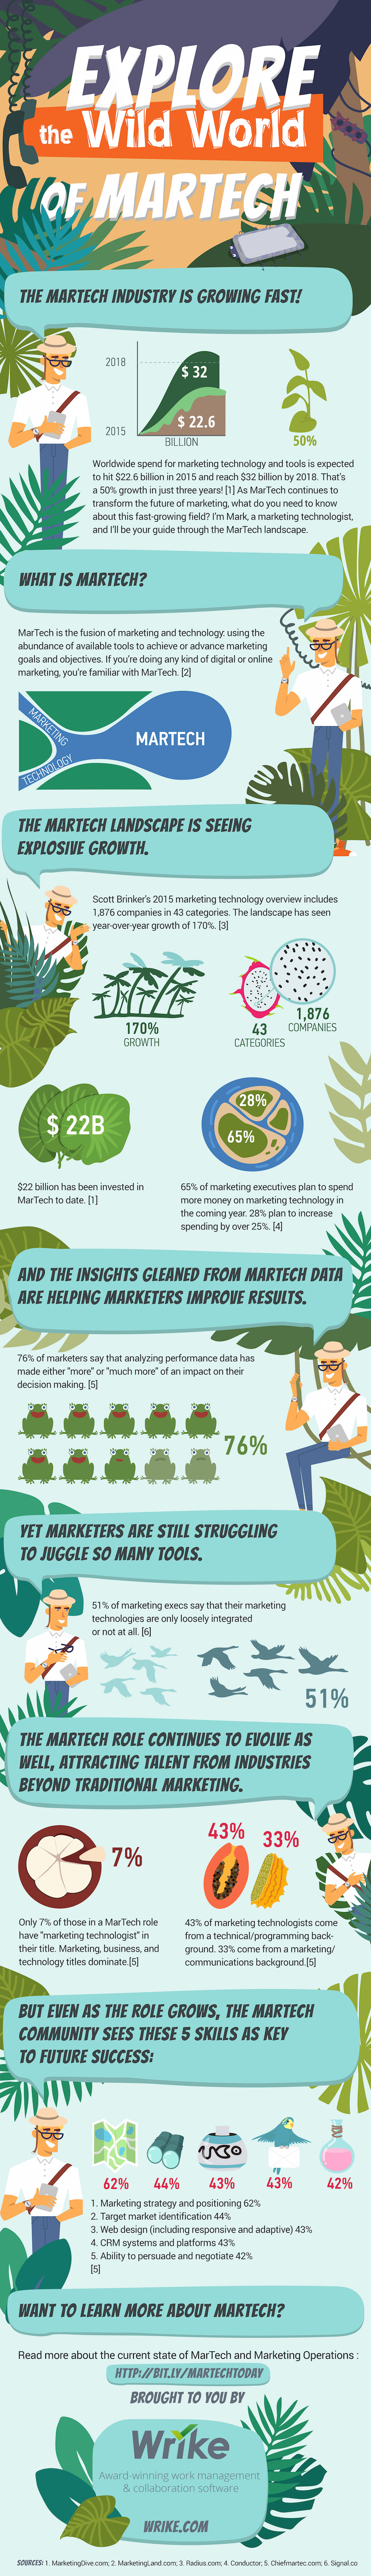 The Guide to MarTech Today (#Infographic)